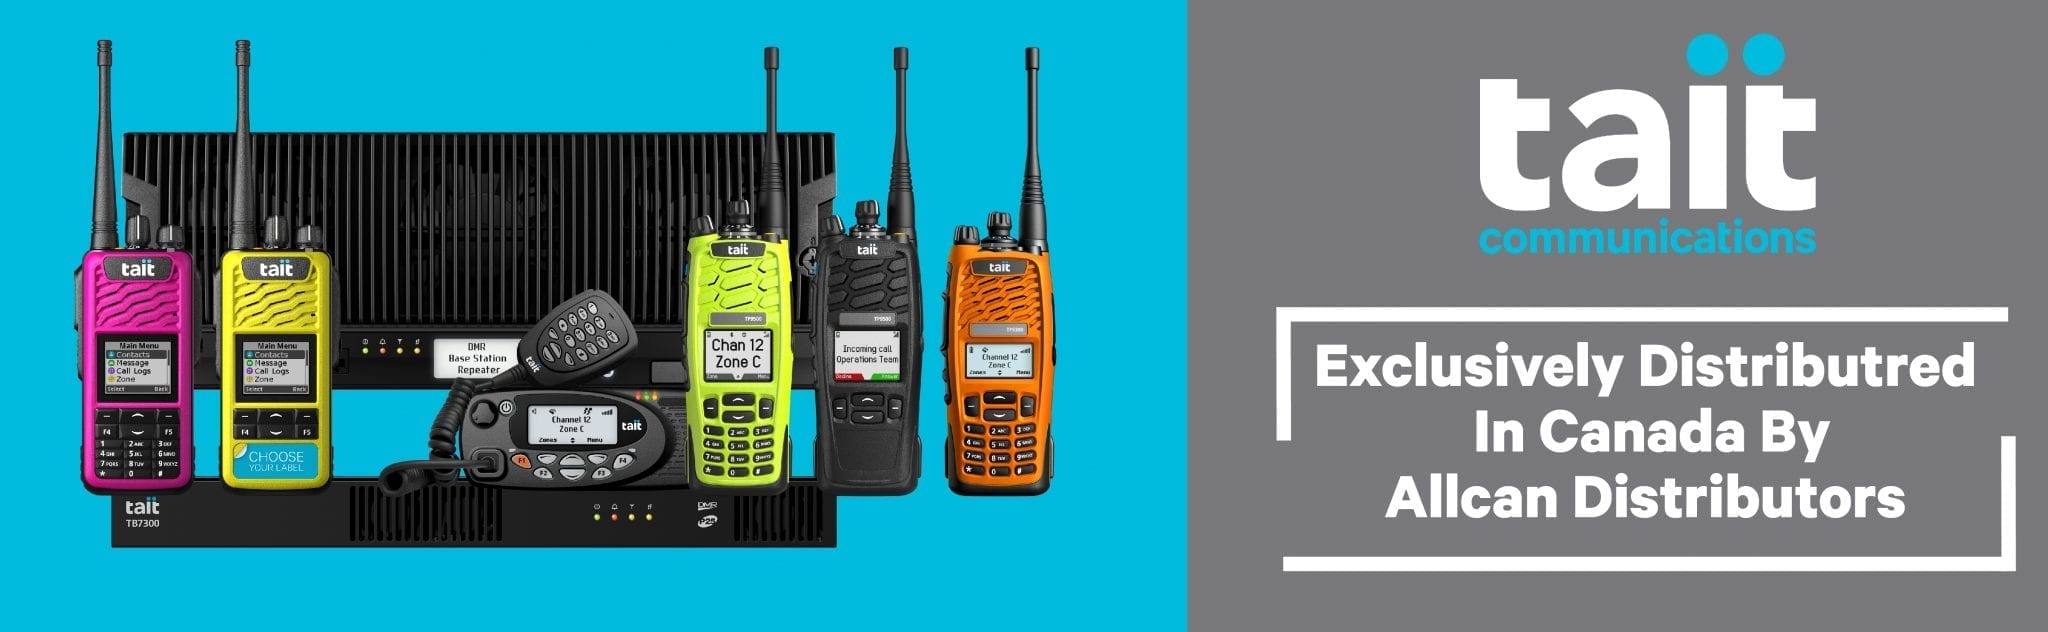 tait communications radios in a variety of colours